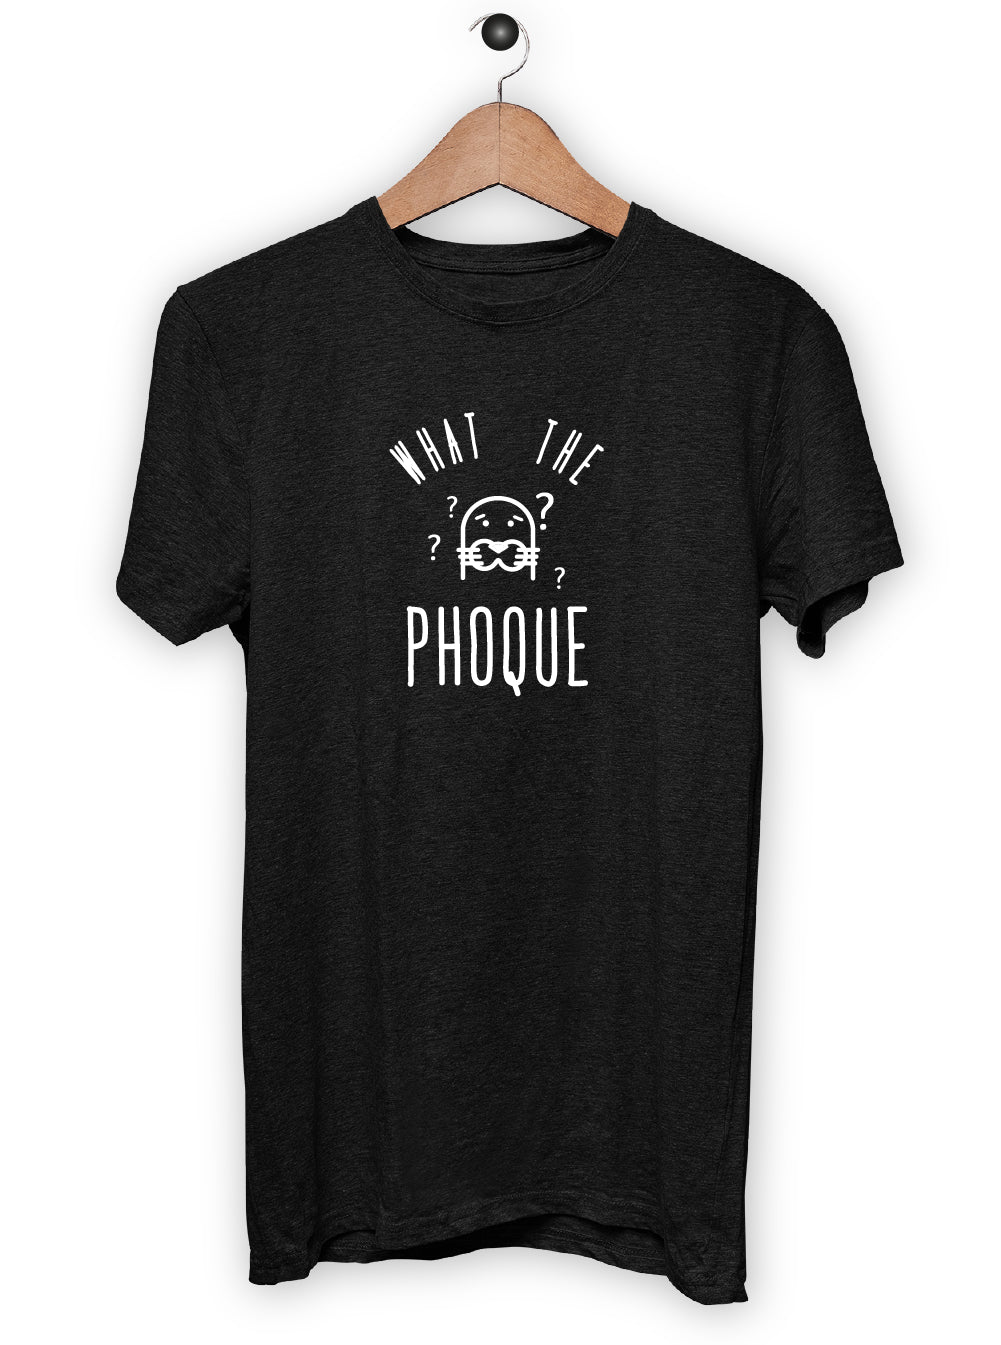 T-Shirt "WHAT THE PHOQUE"